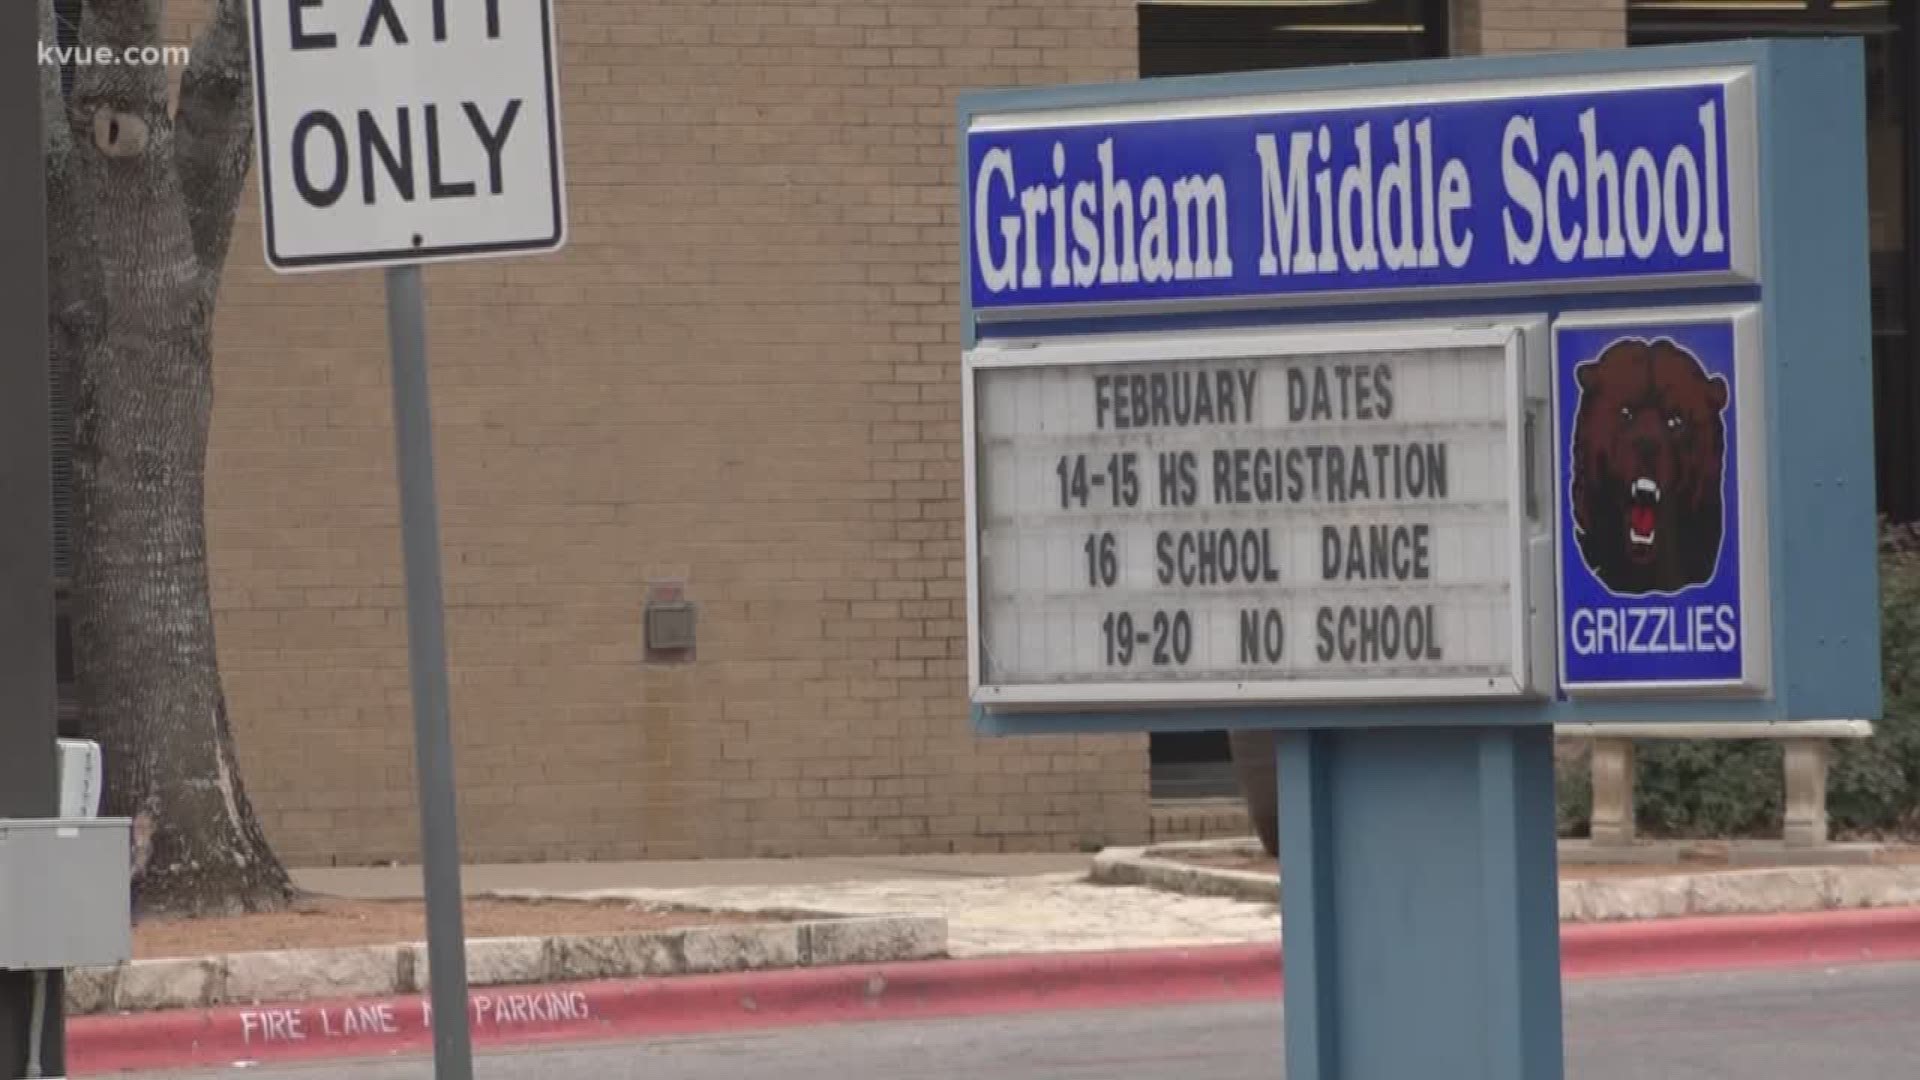 A local middle school student is in trouble for playing a school prank. Yesterday, Round Rock ISD says a Grisham Middle School student used a credit card to order a stripper.